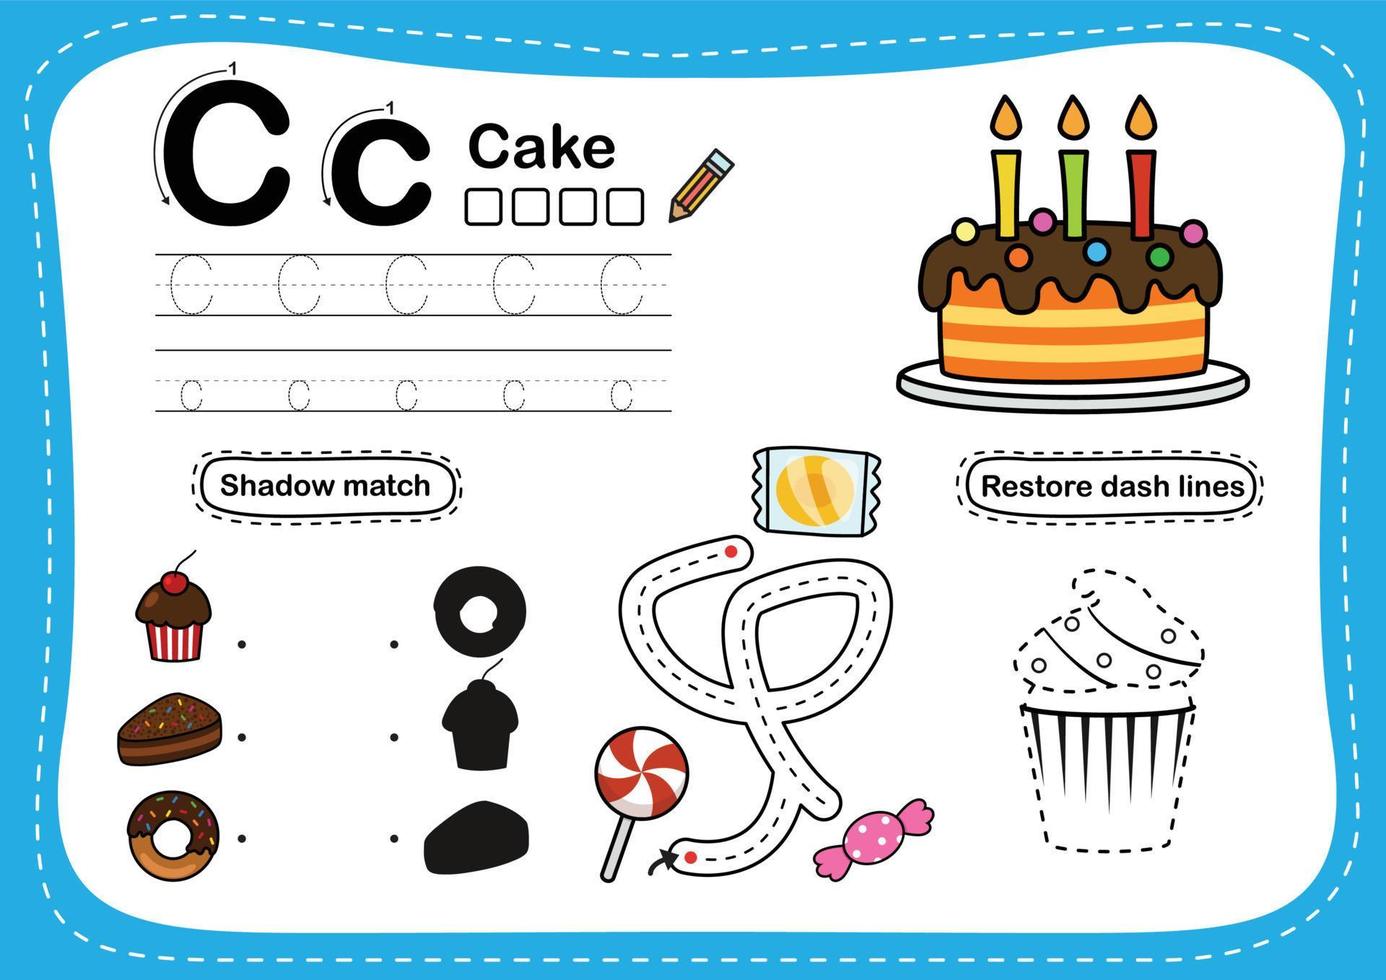 Alphabet Letter C - Cake exercise with cartoon vocabulary illustration, vector